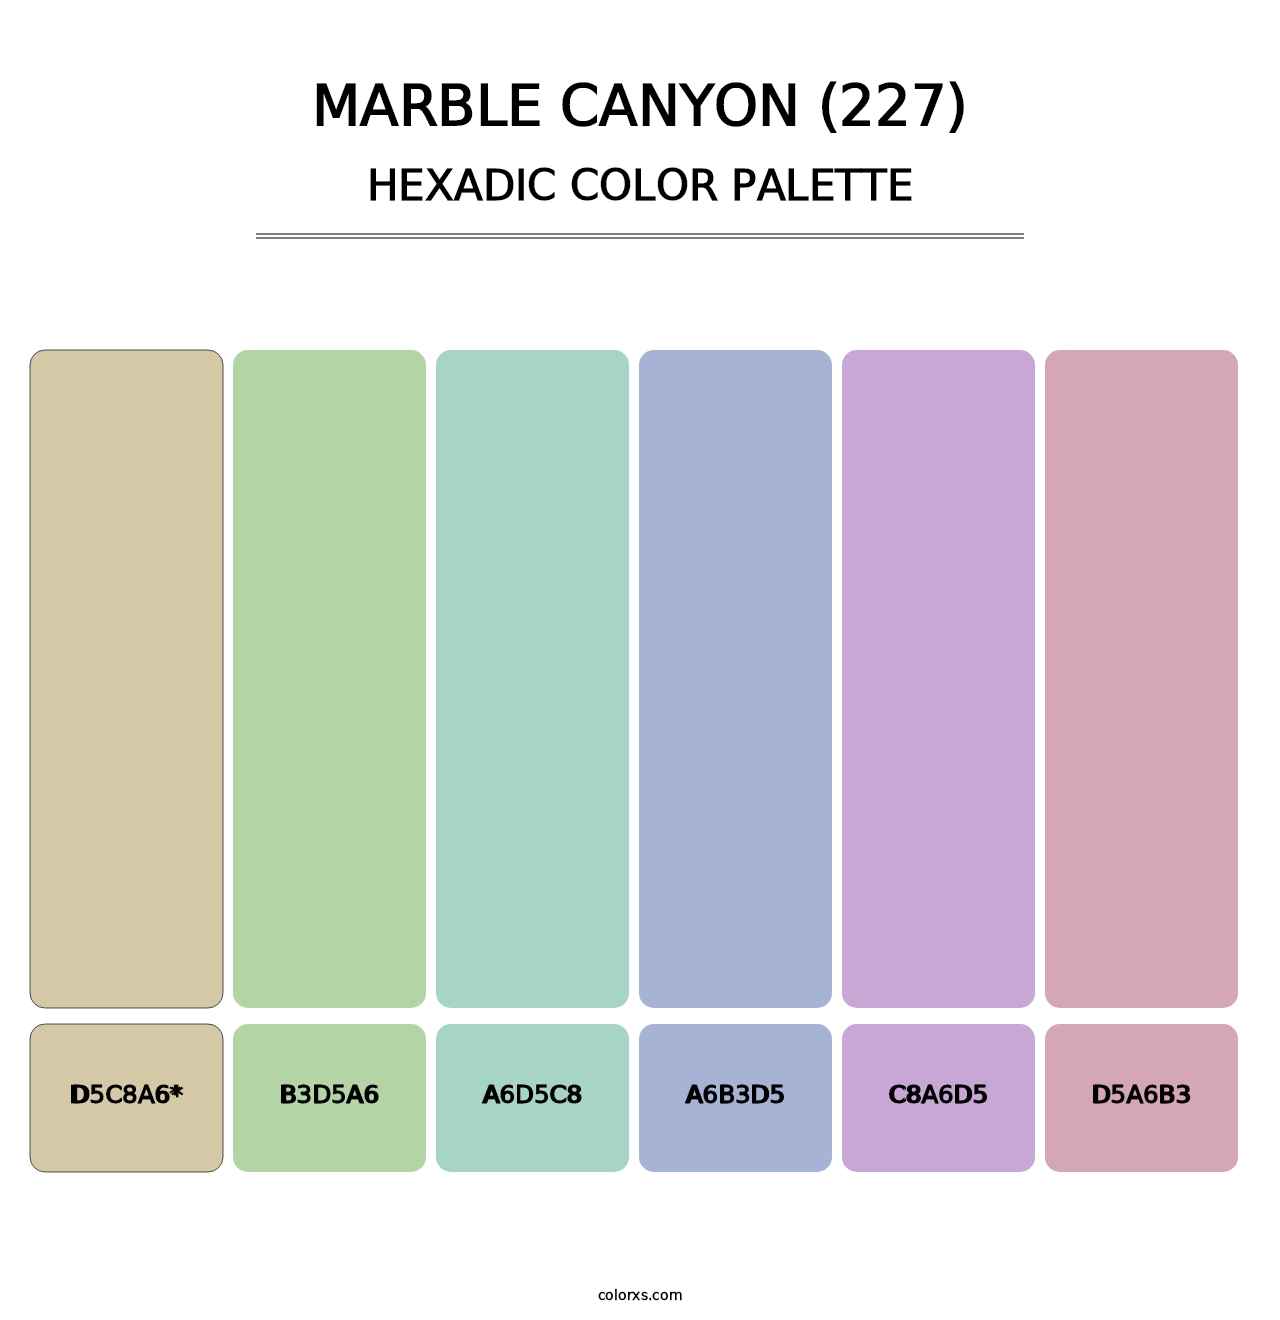 Marble Canyon (227) - Hexadic Color Palette